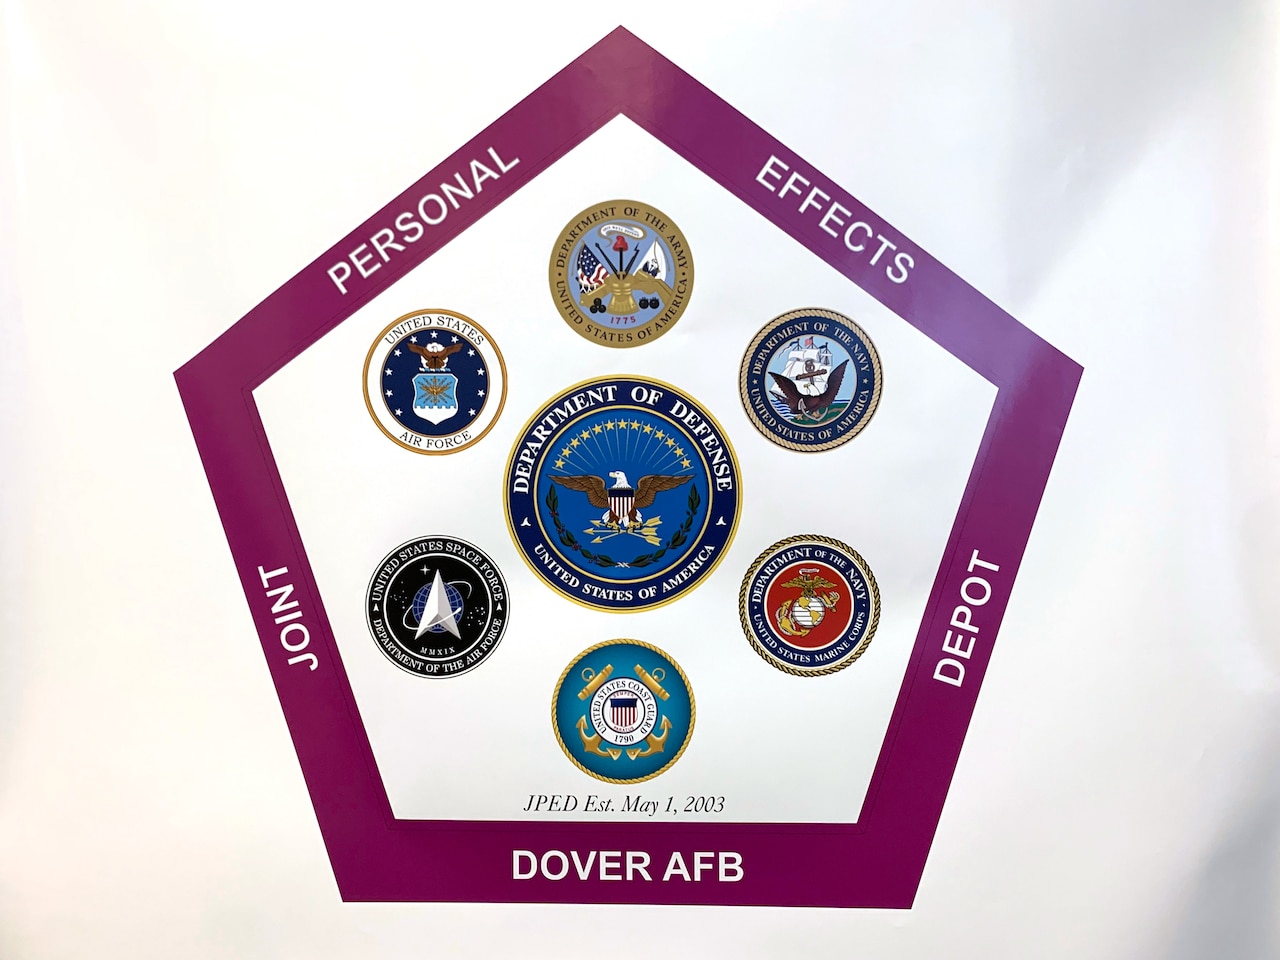 A pentagonal shaped insignia that reads “Joint Personal Effects Depot Dover AFB” includes seven round insignia inside it.